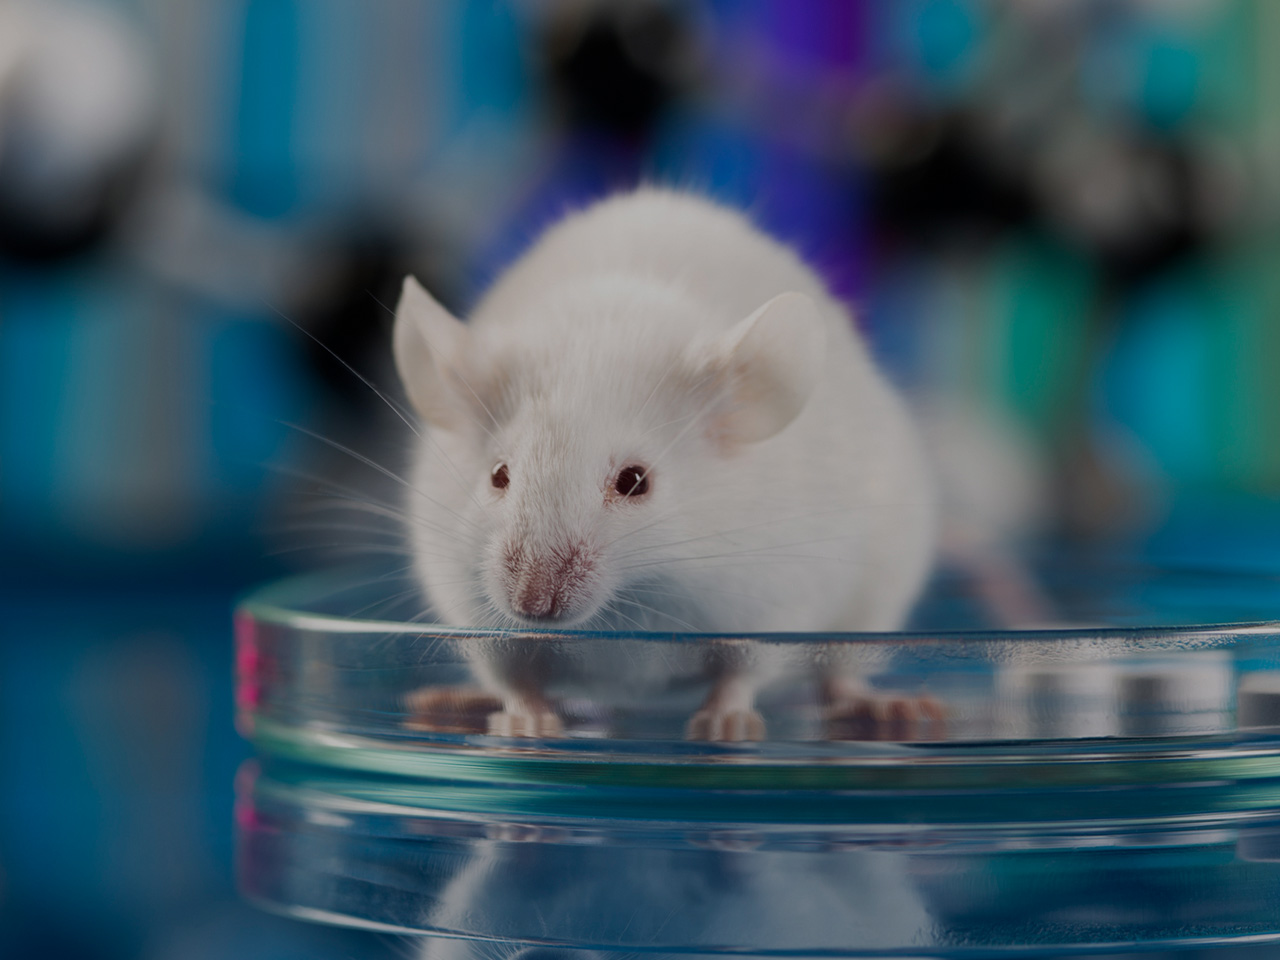 Why Animal Testing Should Be Banned